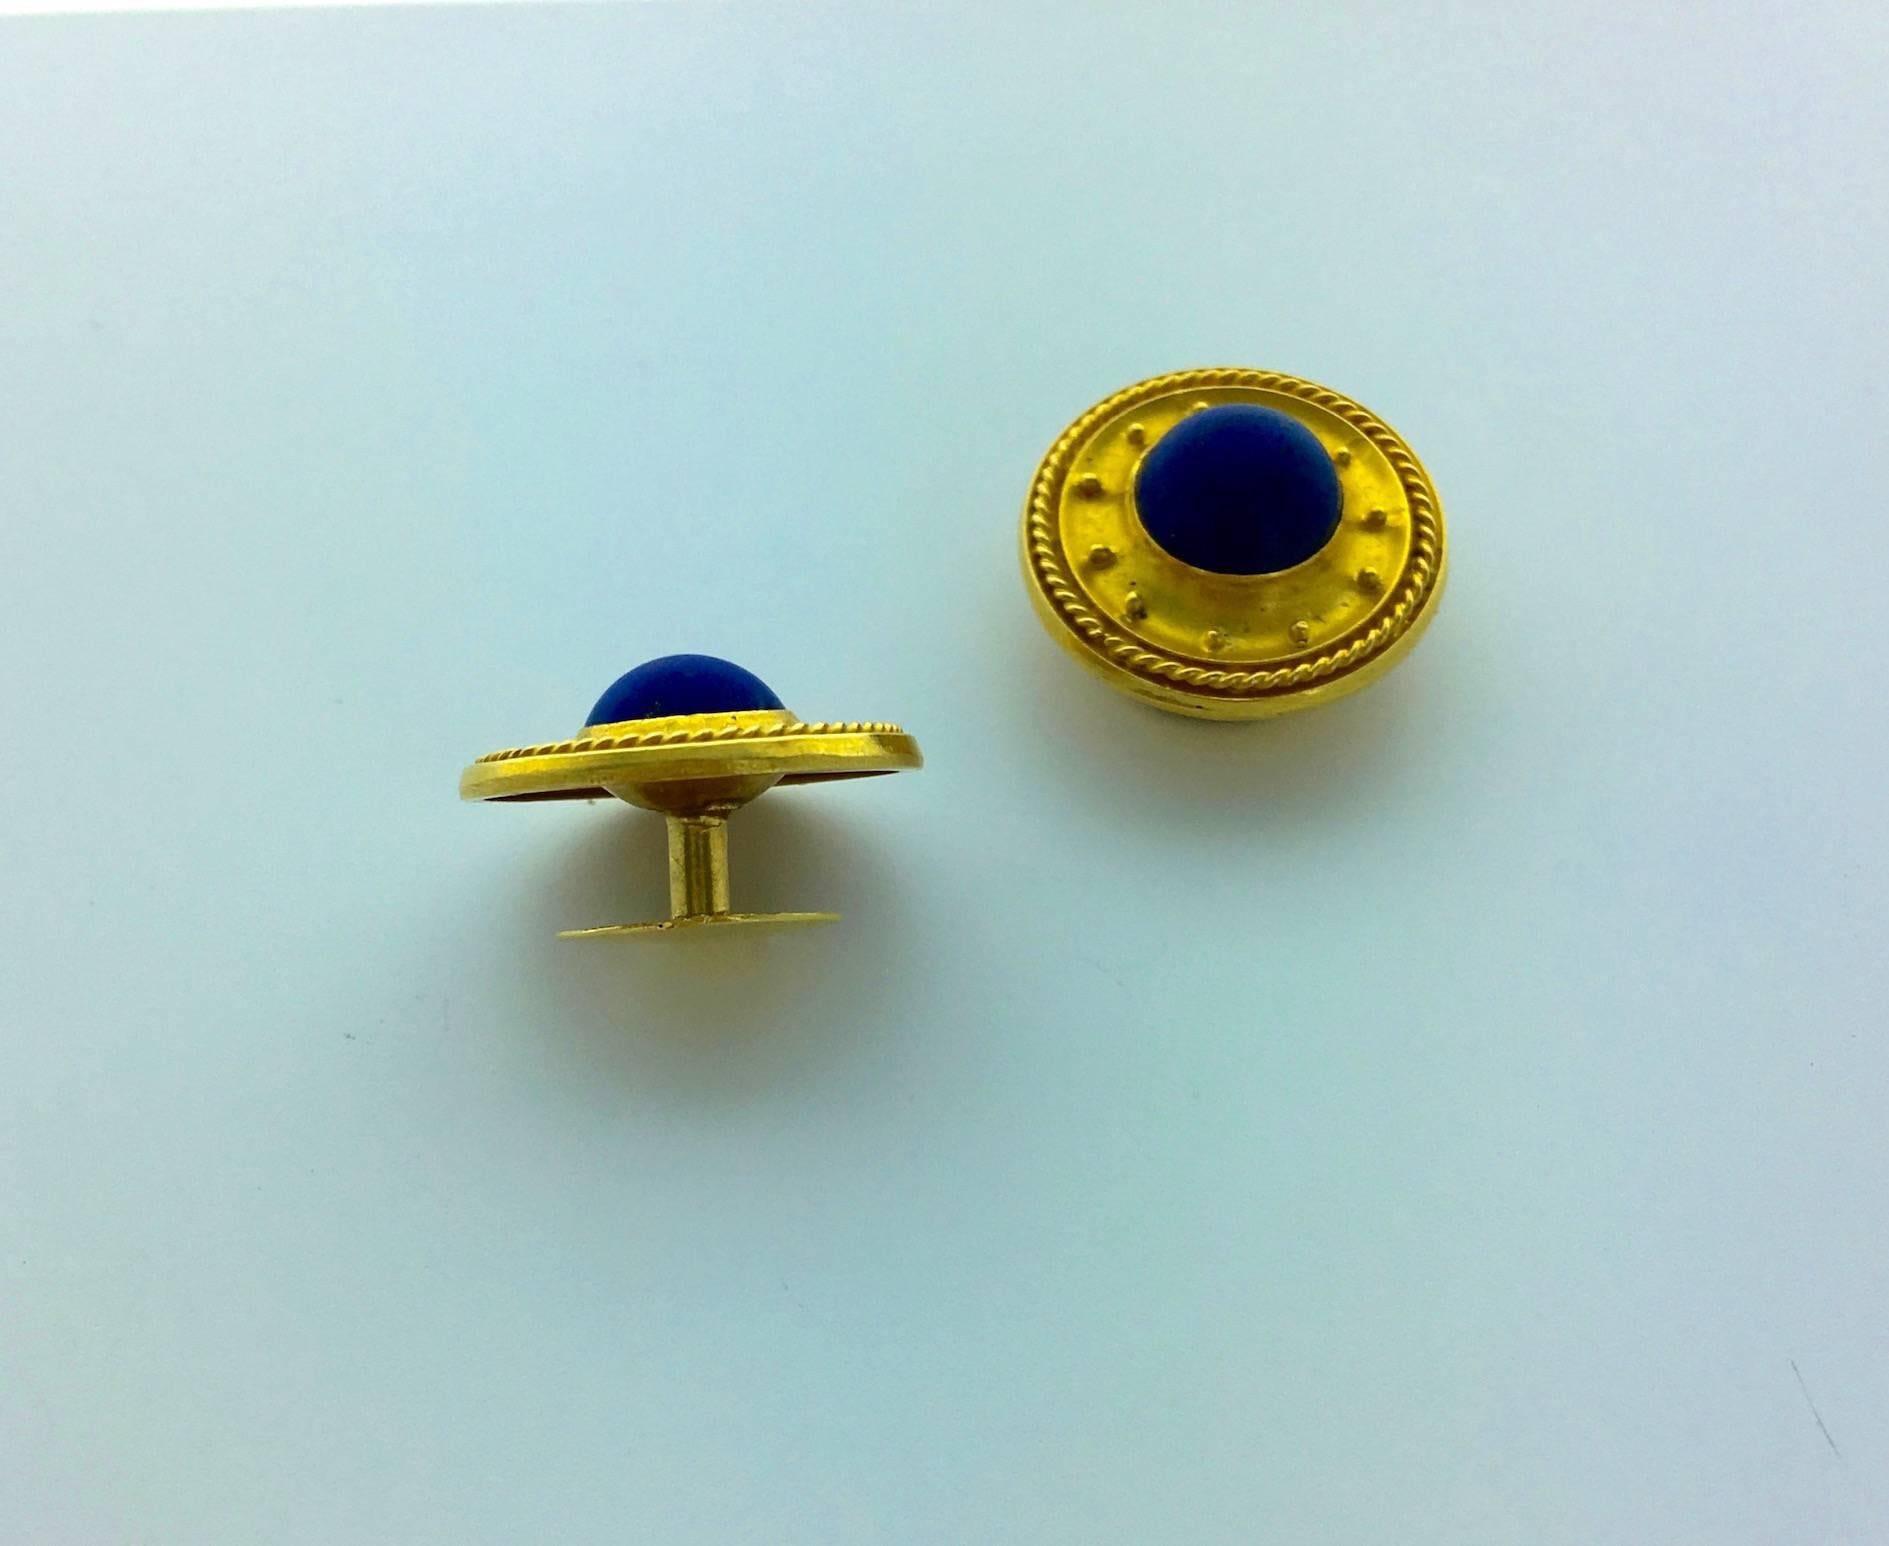 Yellow gold engraved Etruscan Revival Studs centered by Lapis Lazuli.
French marks.

Circa 1850.